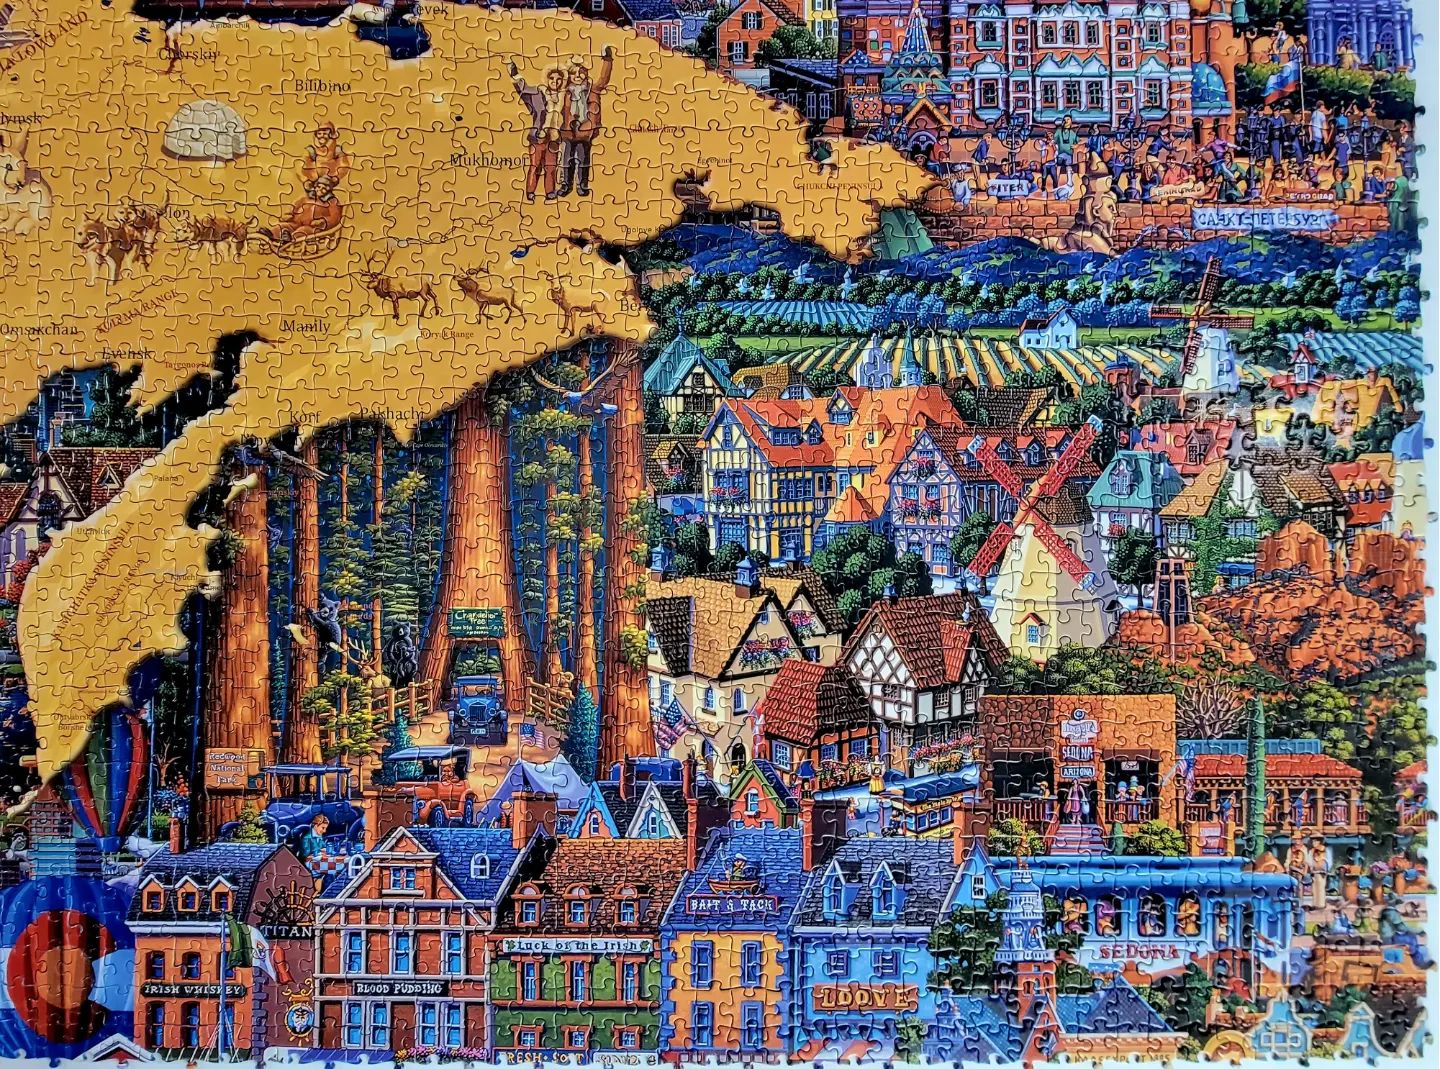 The World's Largest Puzzle by Dowdle